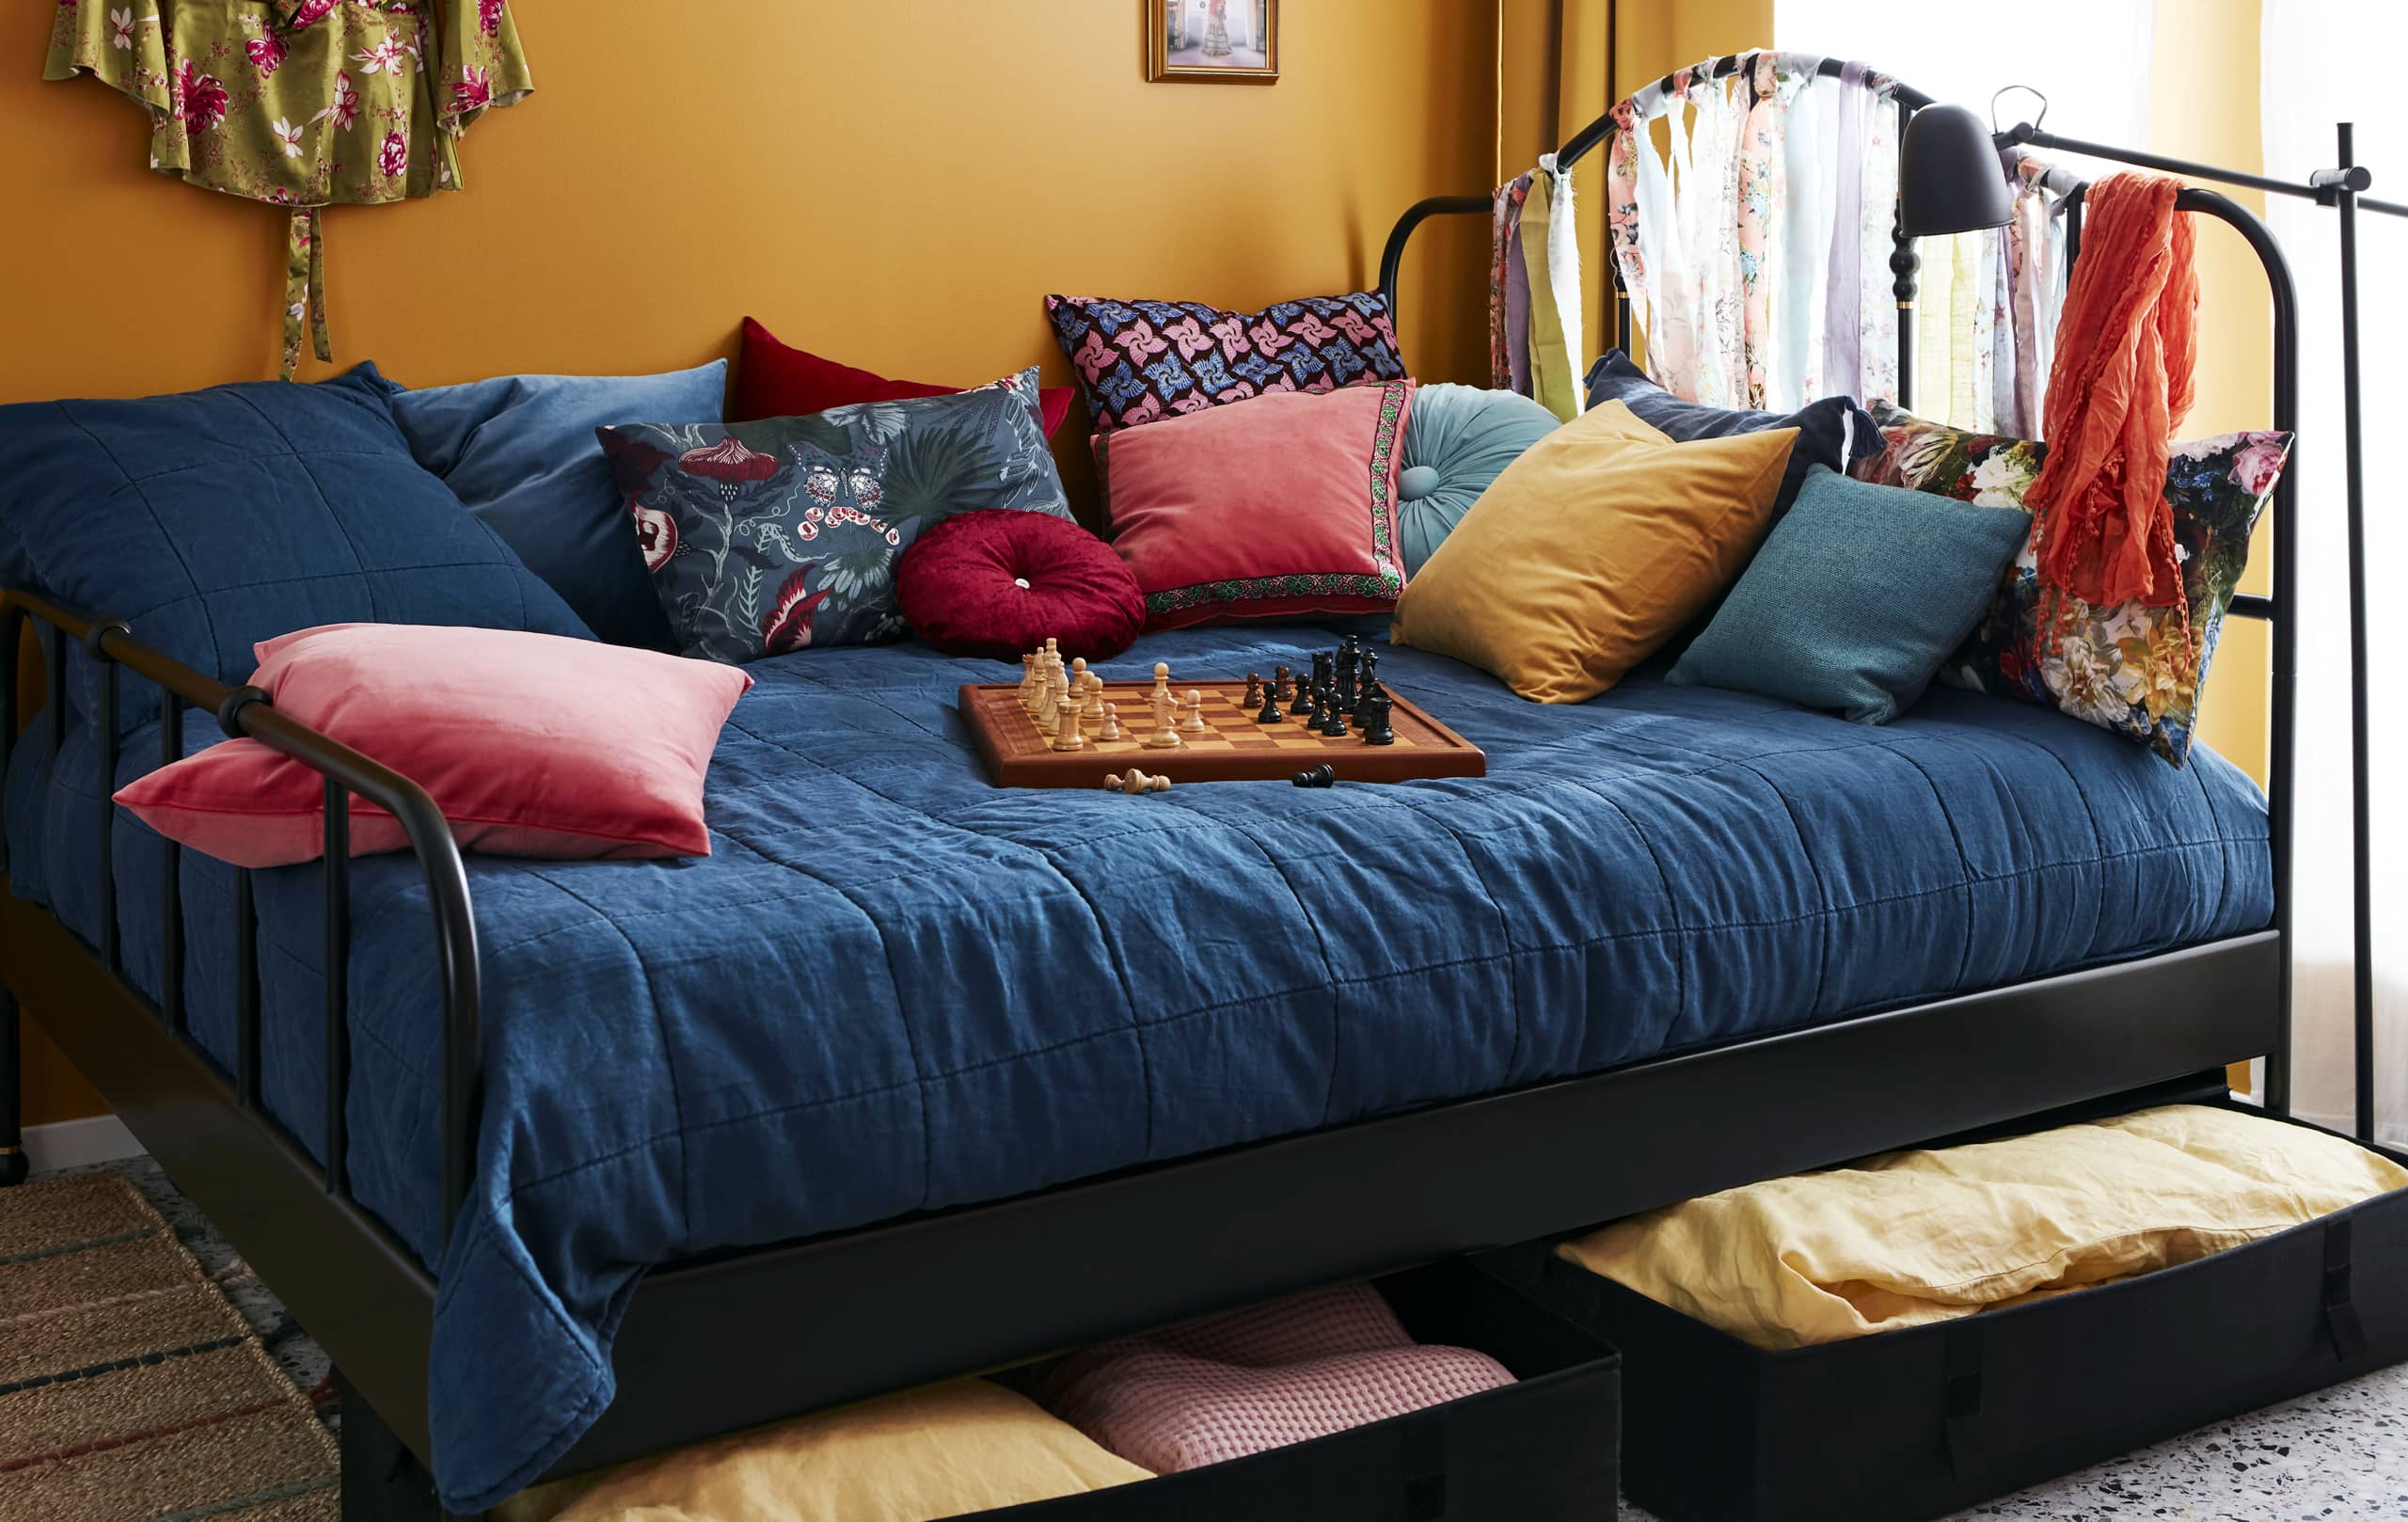 IKEA Ideas - Using your bed as more than a bed